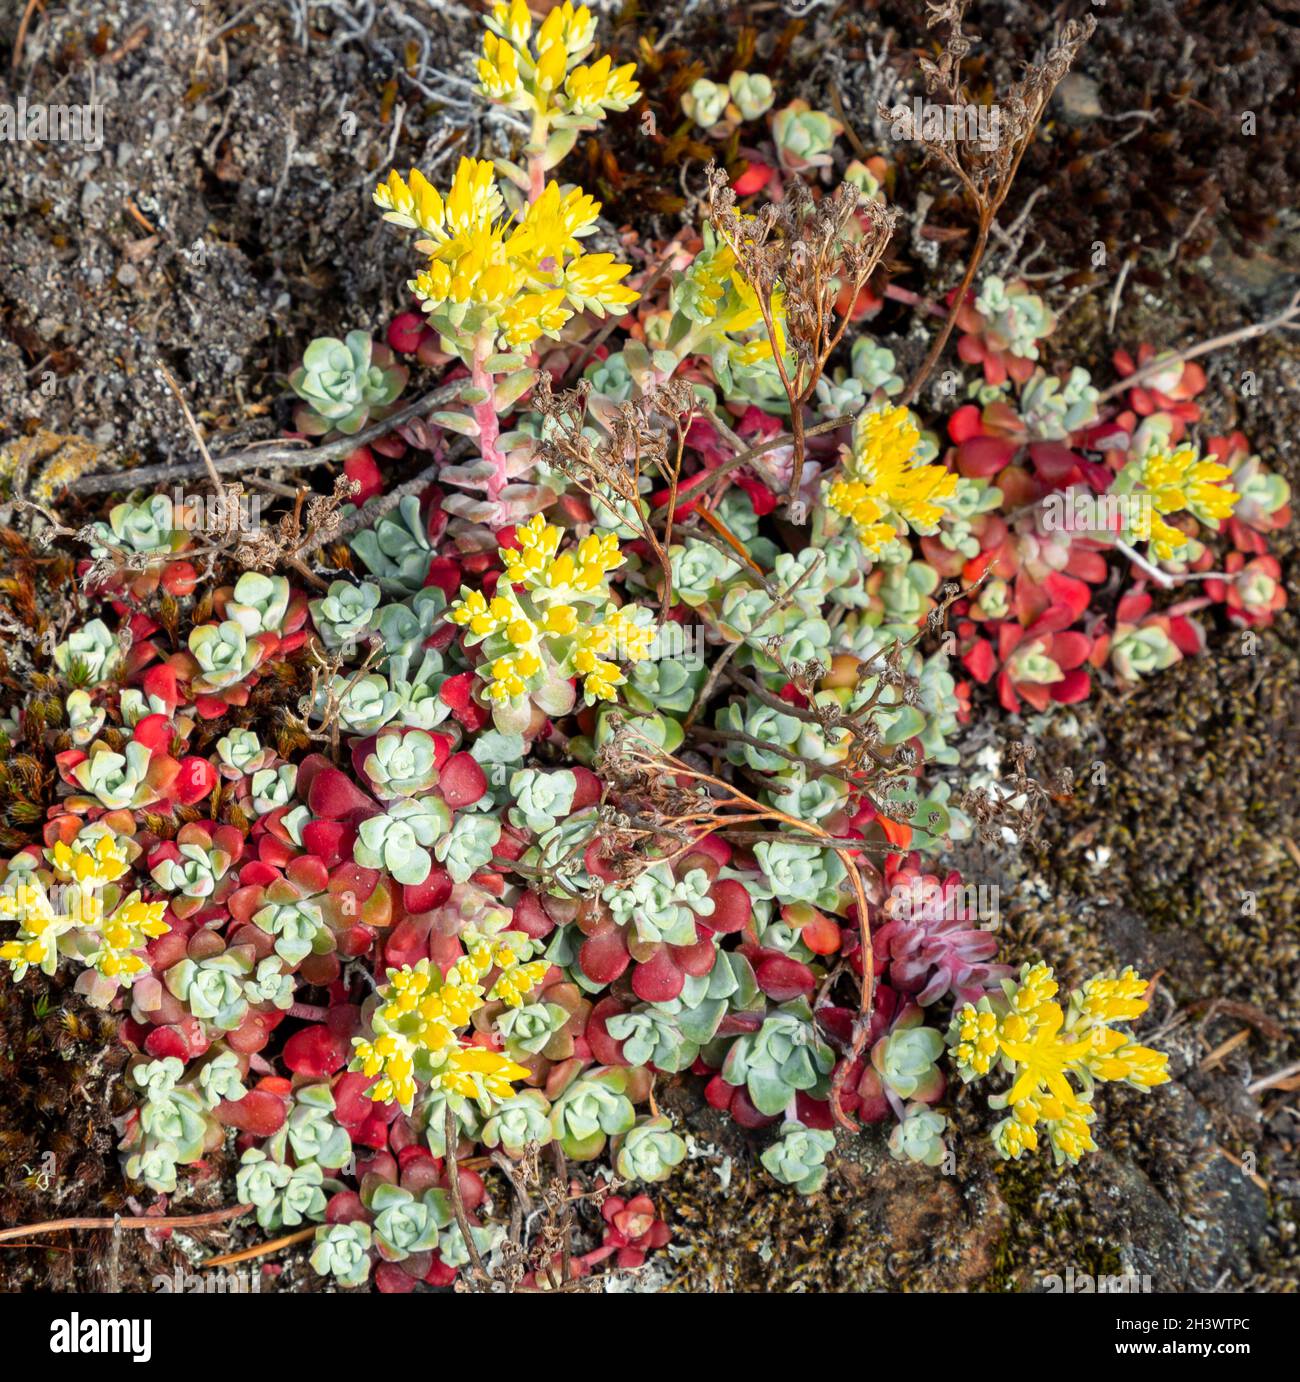 WA19734-00...WASHINGTON - A wild dudleya, a succulant that grows well on the rocky cliffs above Rosario Strait in Sharpe Park. Stock Photo